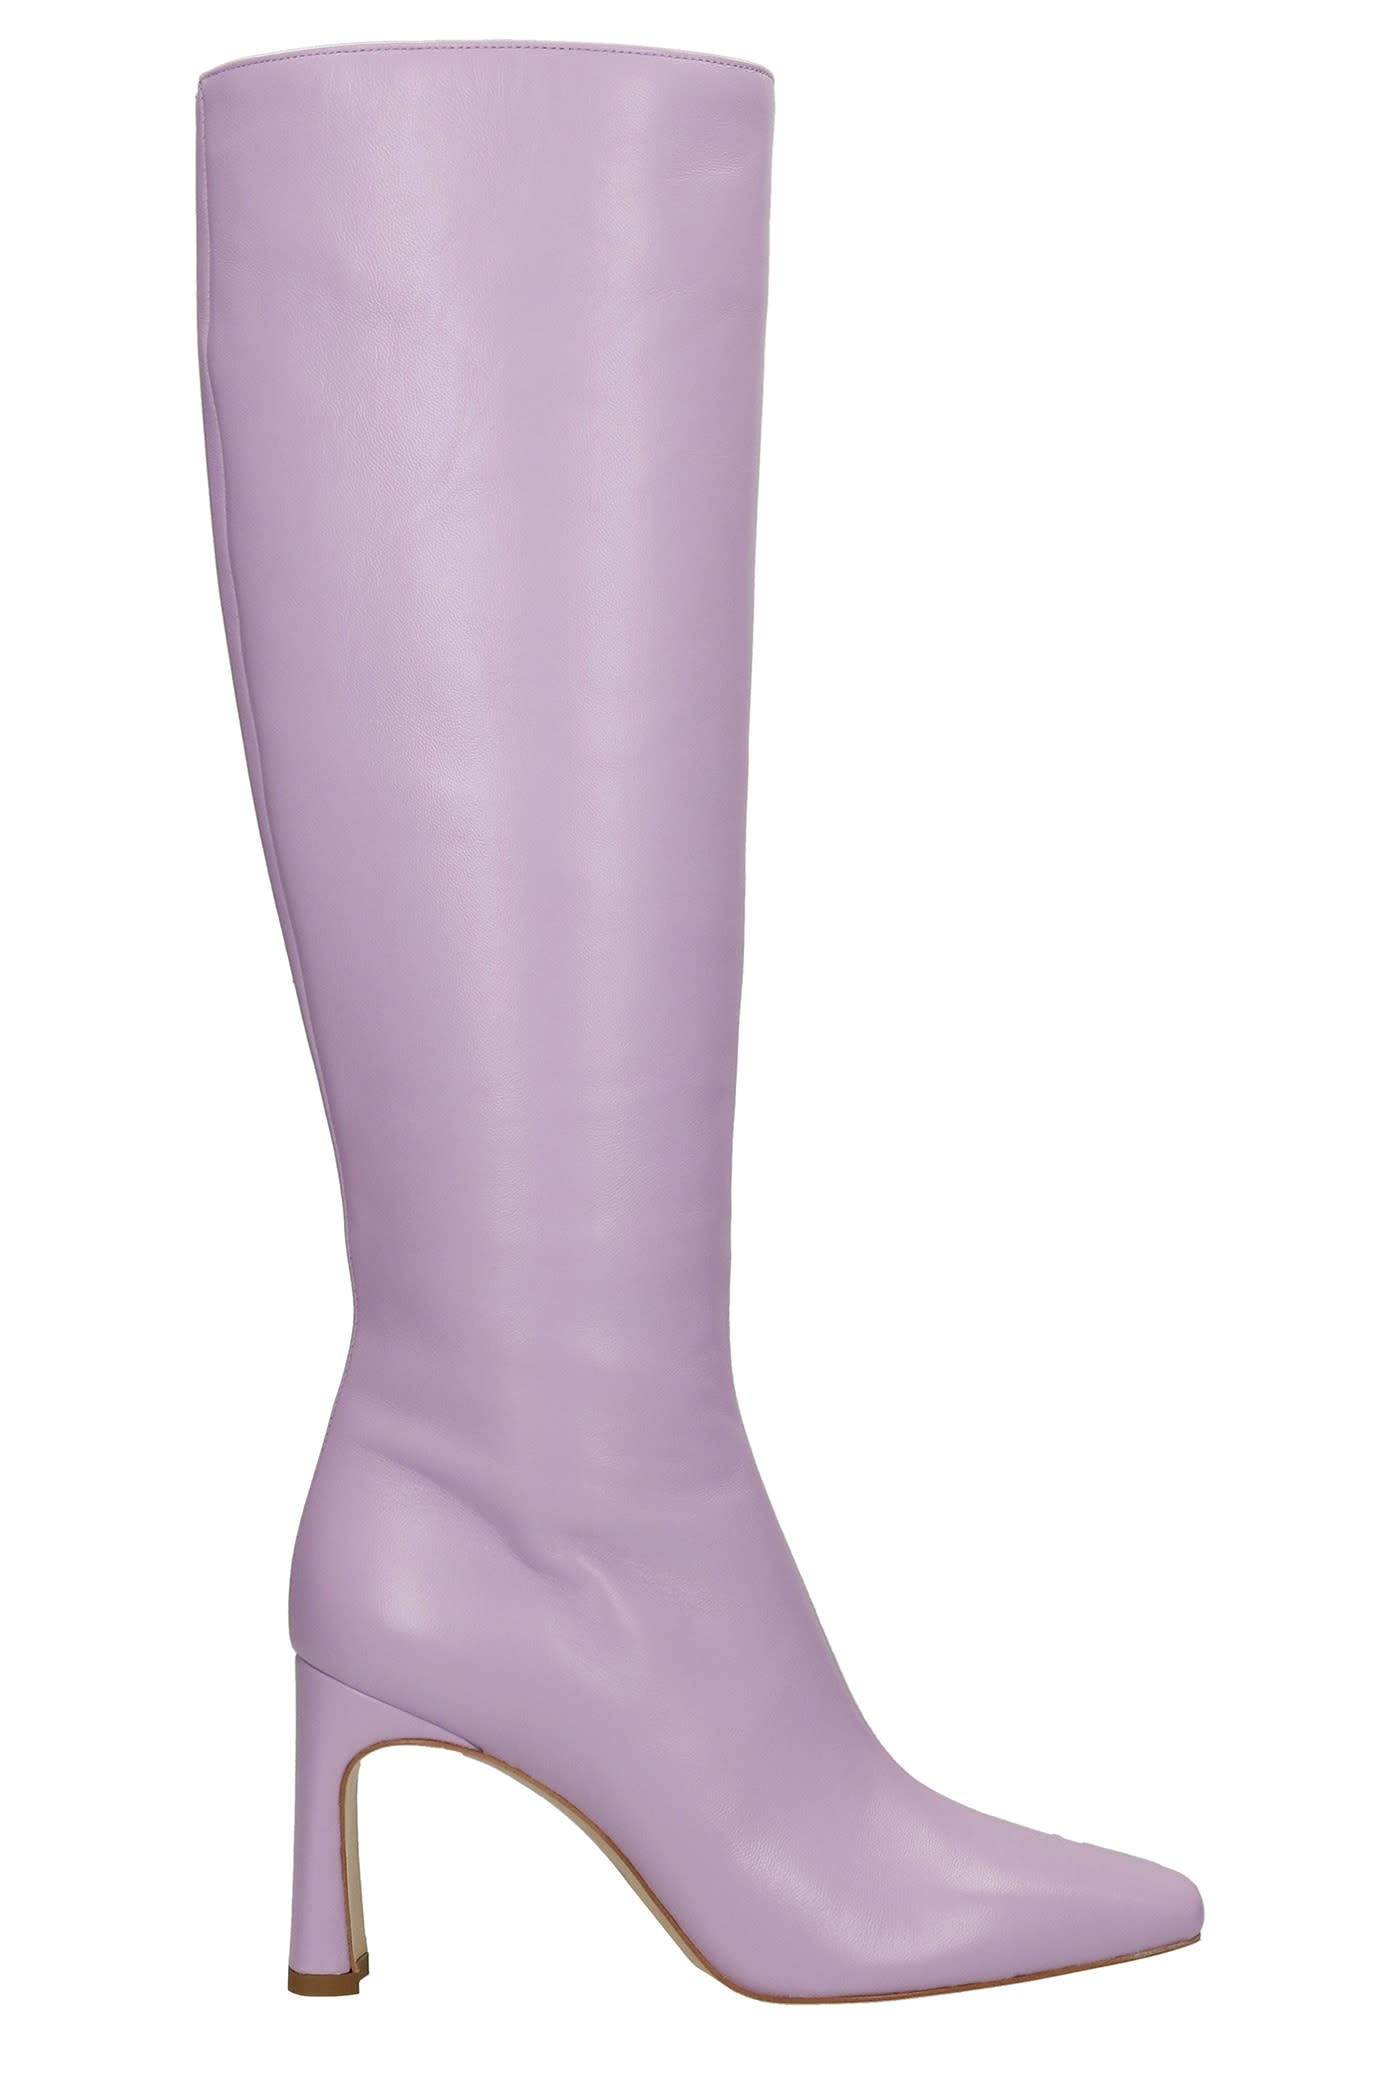 Liu-Jo Squared Lh01 High Heels Boots In Viola Leather